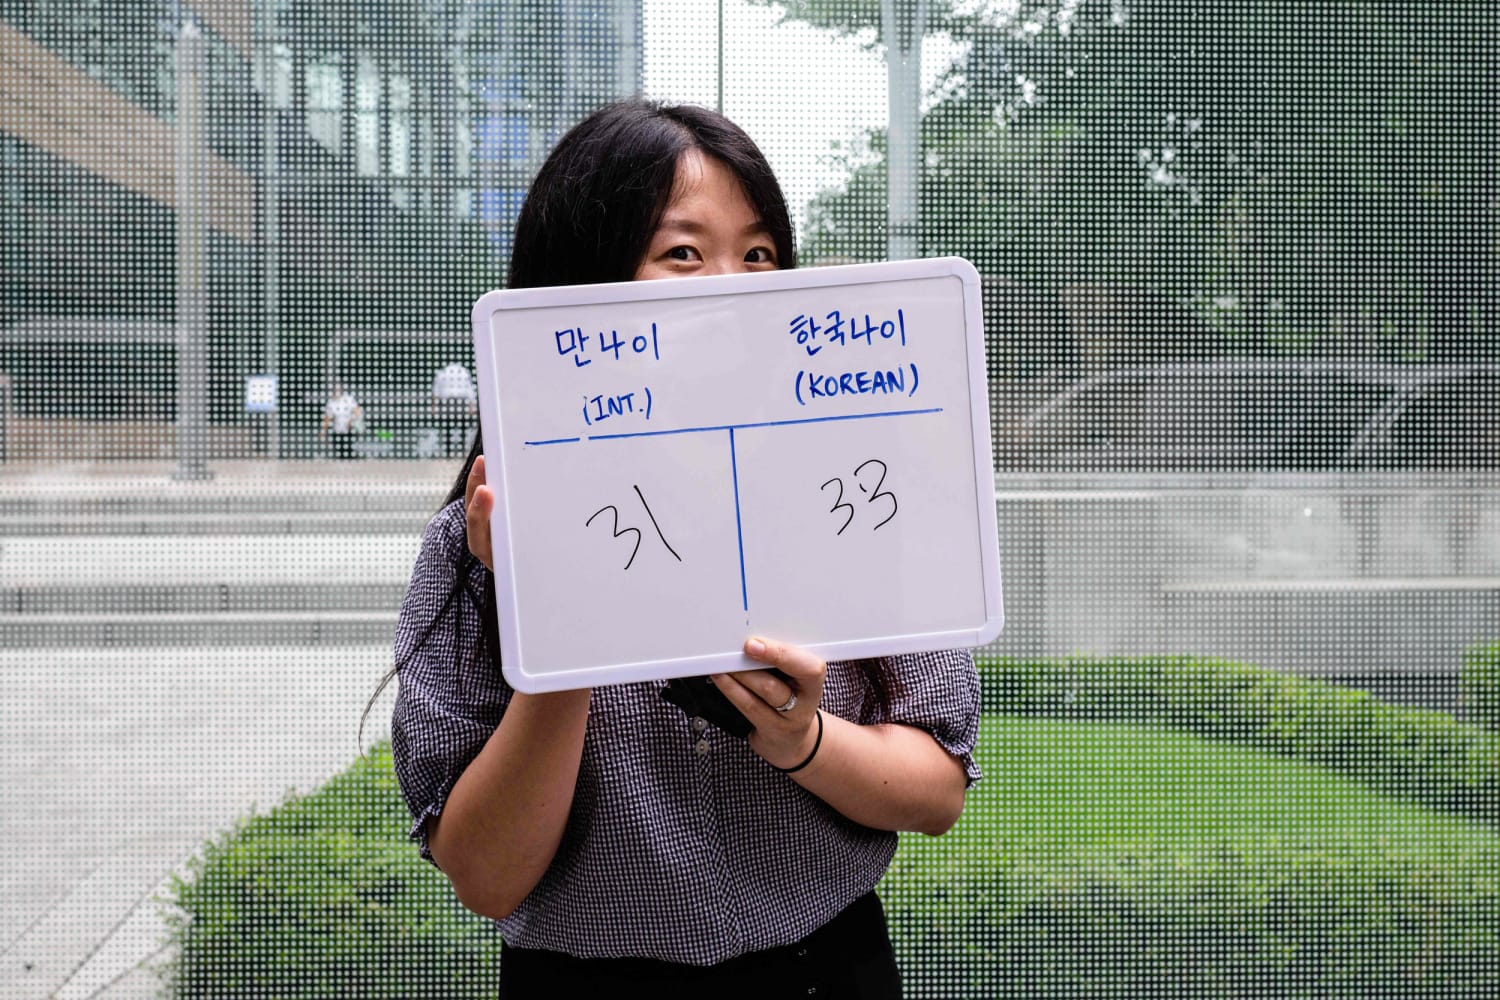 Are South Koreans getting a year younger?